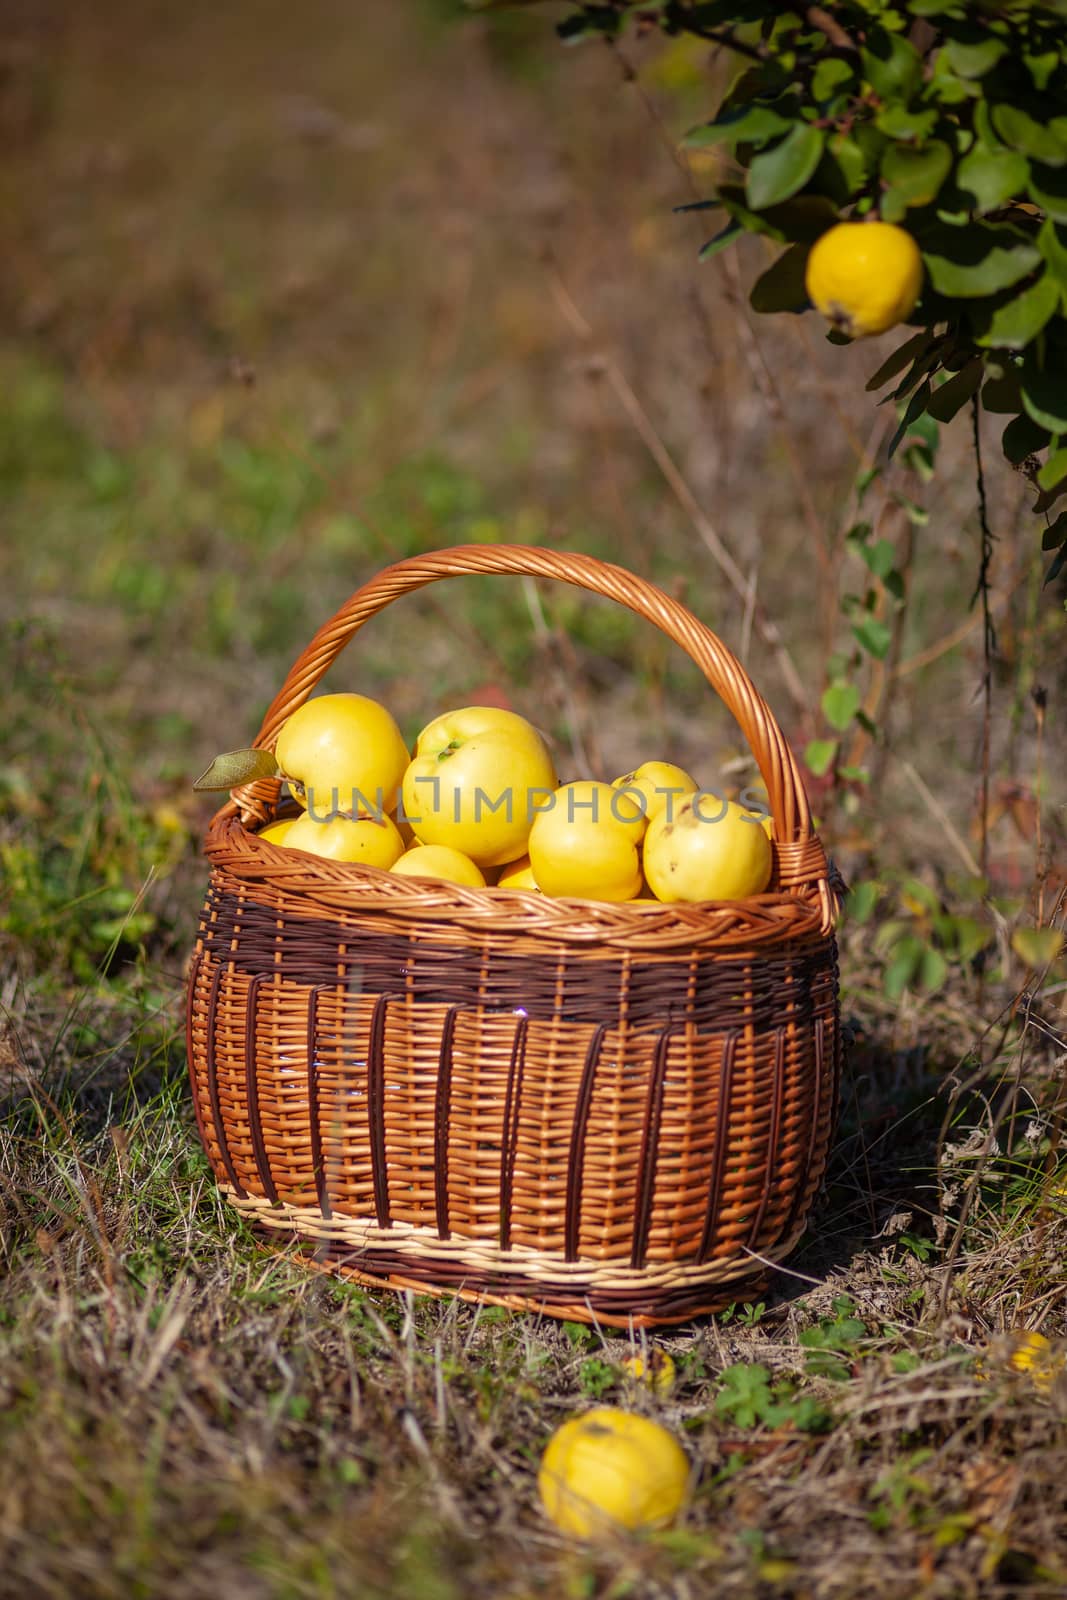 Still life autumn photo of freshly picked yellow quinces in a basket